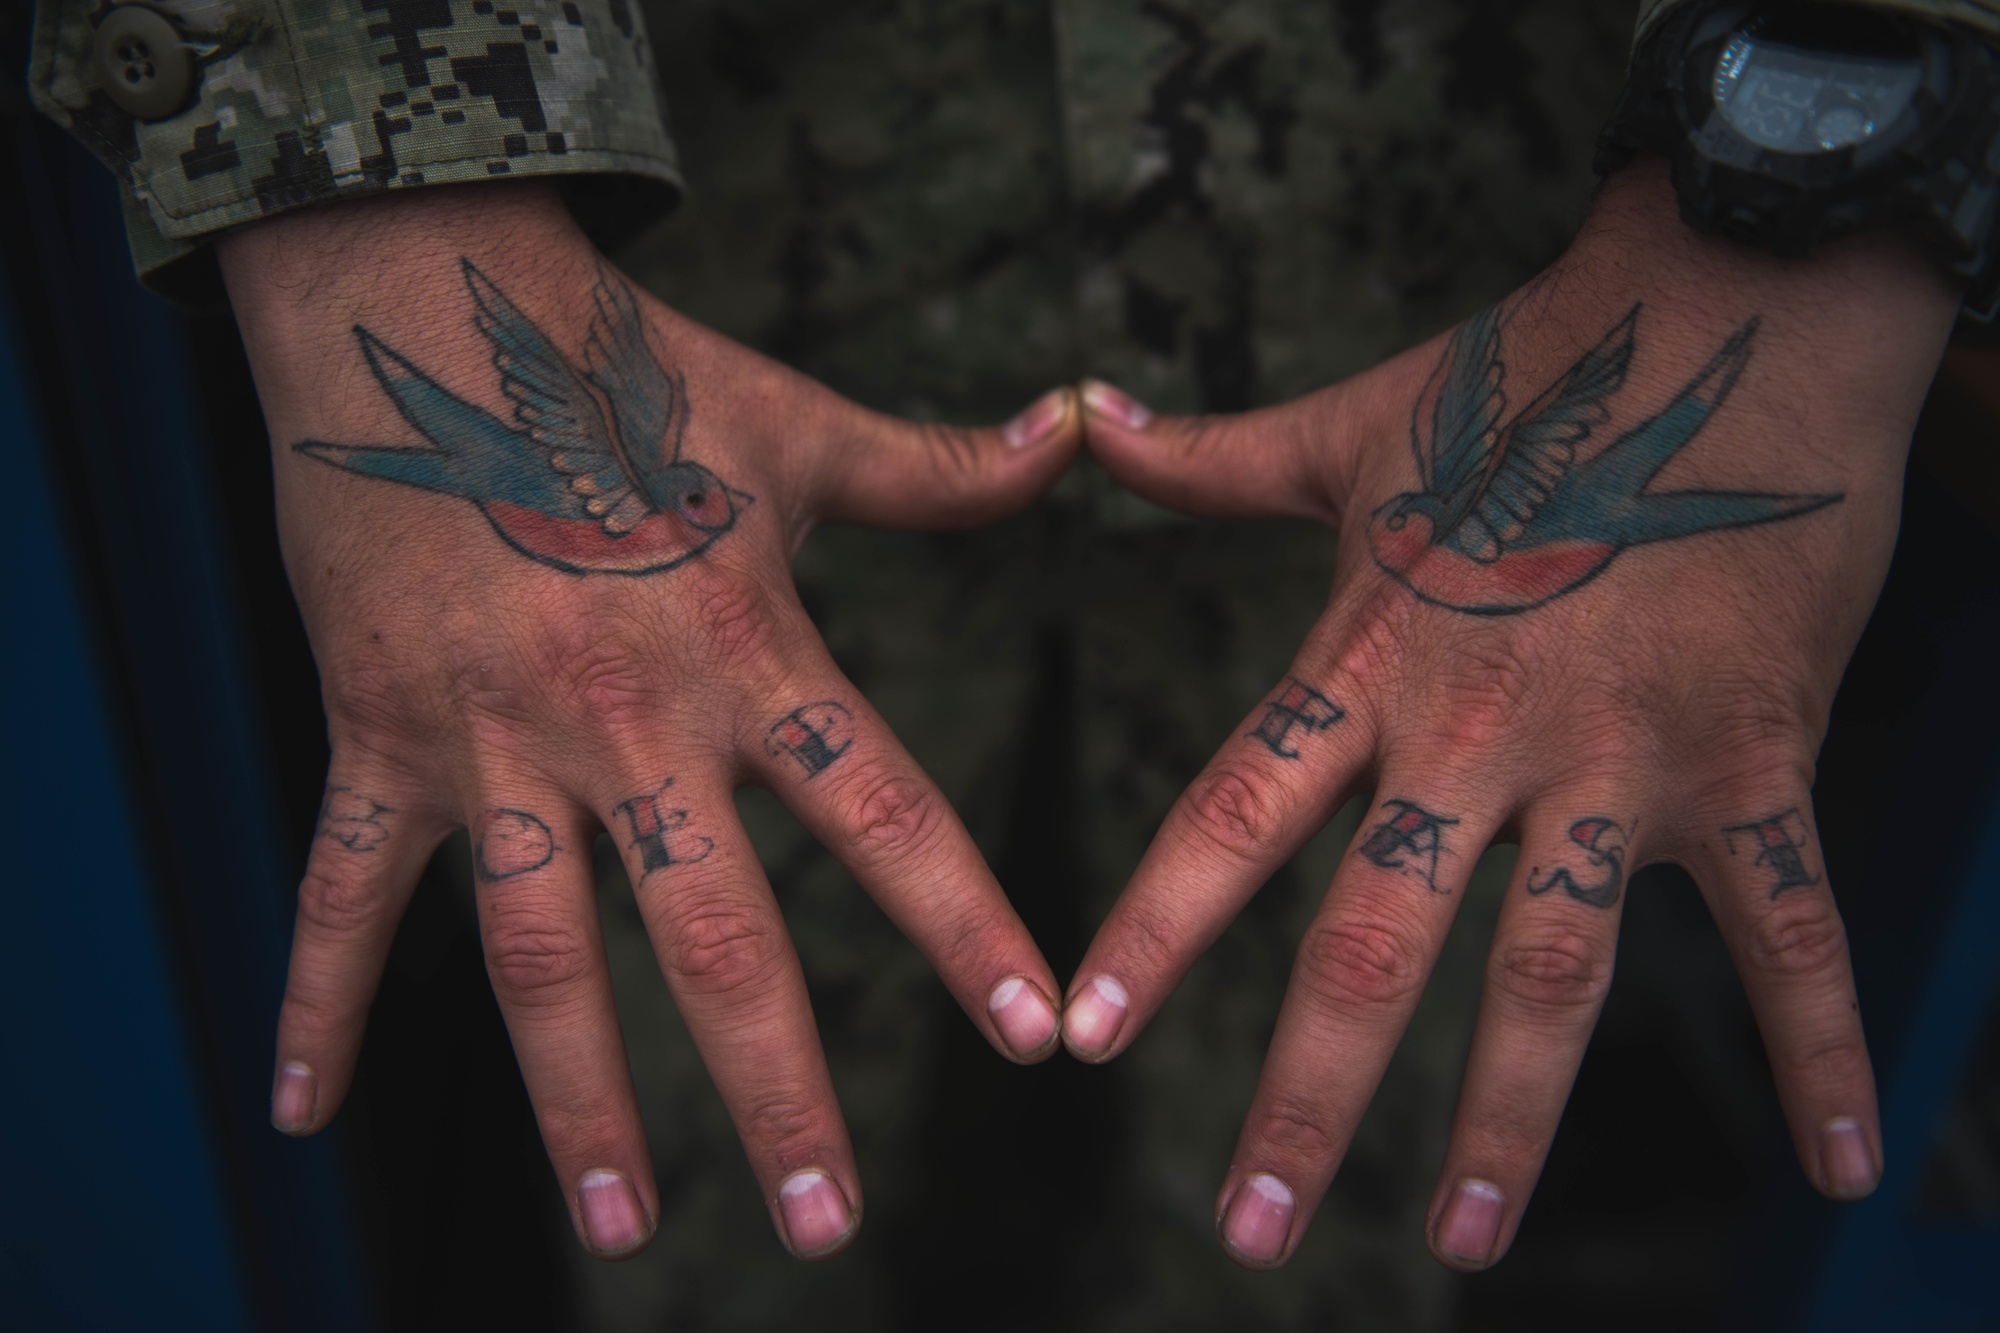 DVIDS - Images - A Sailor's Tattoos [Image 3 of 19]